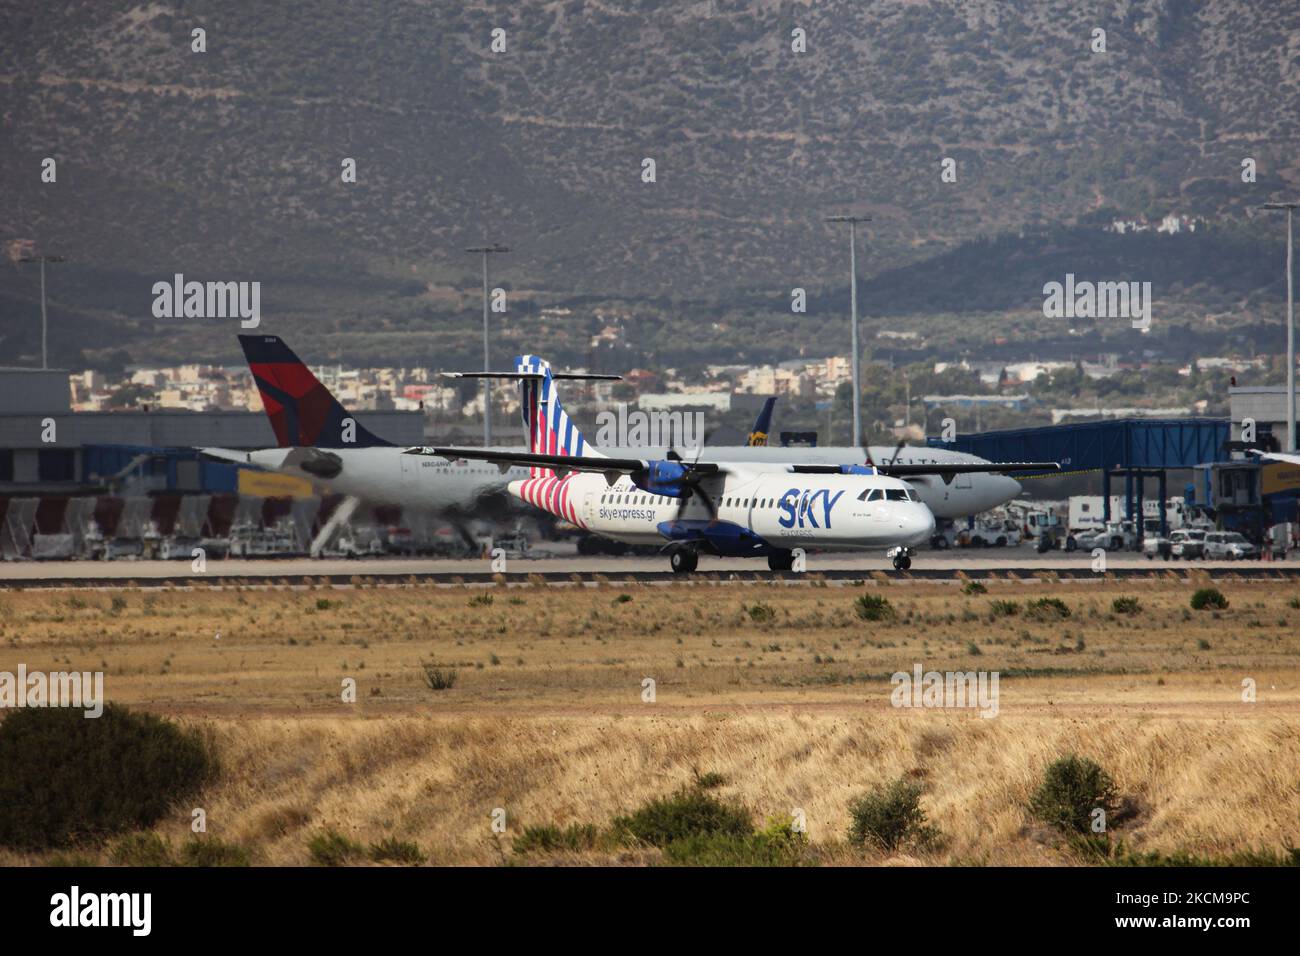 A new Sky Express ATR 72-600 turboprop aircraft with registration SX-ELV as seen departing from Athens International Airport ATH LGAV. SkyExpress is Greek regional airline that is developing recently with modern fuel saving aircraft such as the ATR 72-600 which is ideal for the Greek island with the short runways for take off and landing and Airbus A320neo. On 9 and 10 September this aircraft flew from Athens to Dublin a 6 hours non stop flight, without passengers, exceeding its official range with passengers. Passenger traffic has declined due to the Covid-19 Coronavirus pandemic that affecte Stock Photo